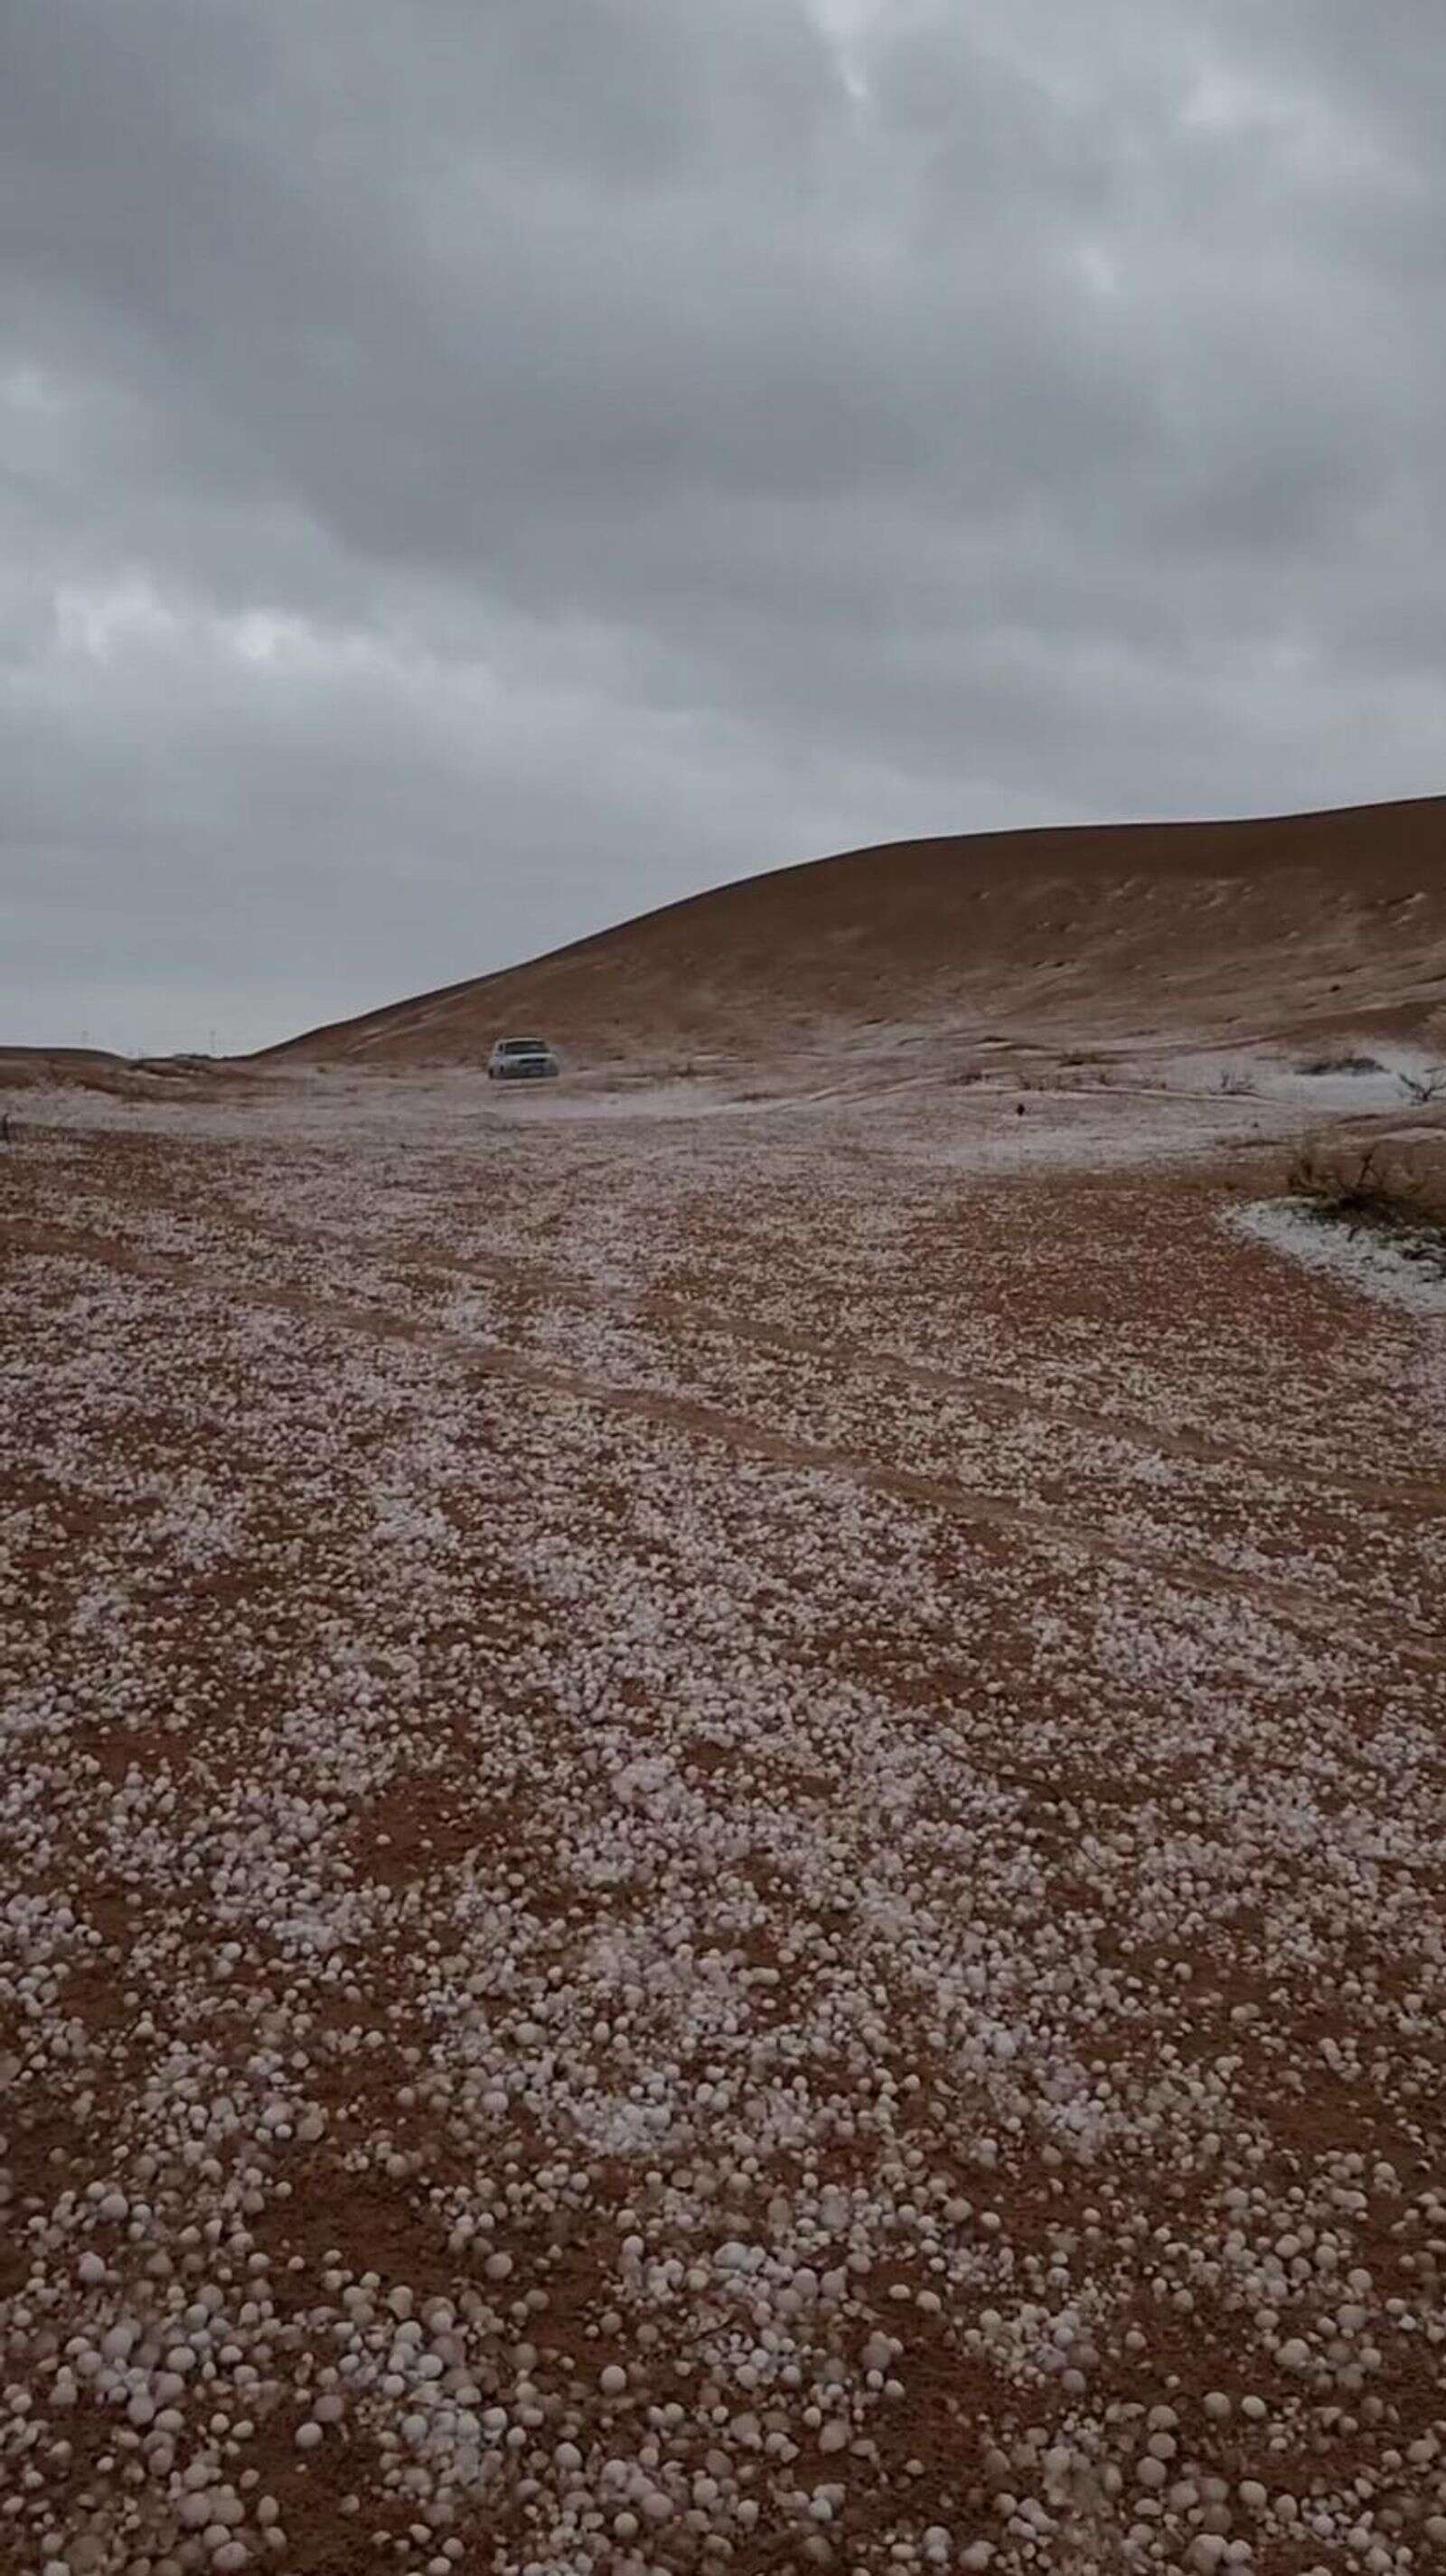 uae: hailstorm alert issued for al ain, adverse weather expected in parts of abu dhabi